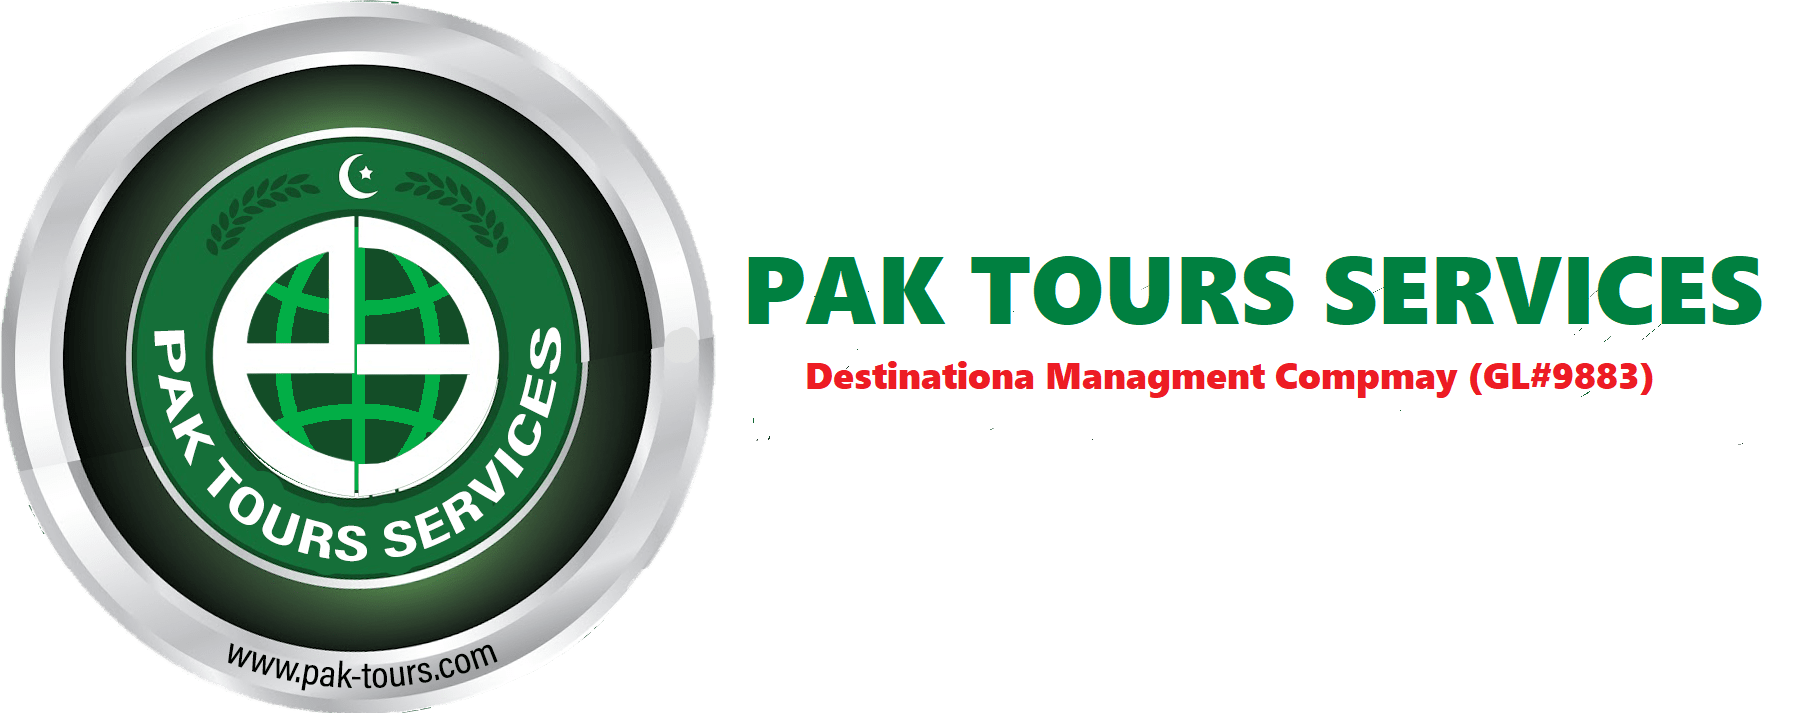 Your Trusted Travel Partner | Pakistan Tour Family Packages from Karachi - Your Trusted Travel Partner